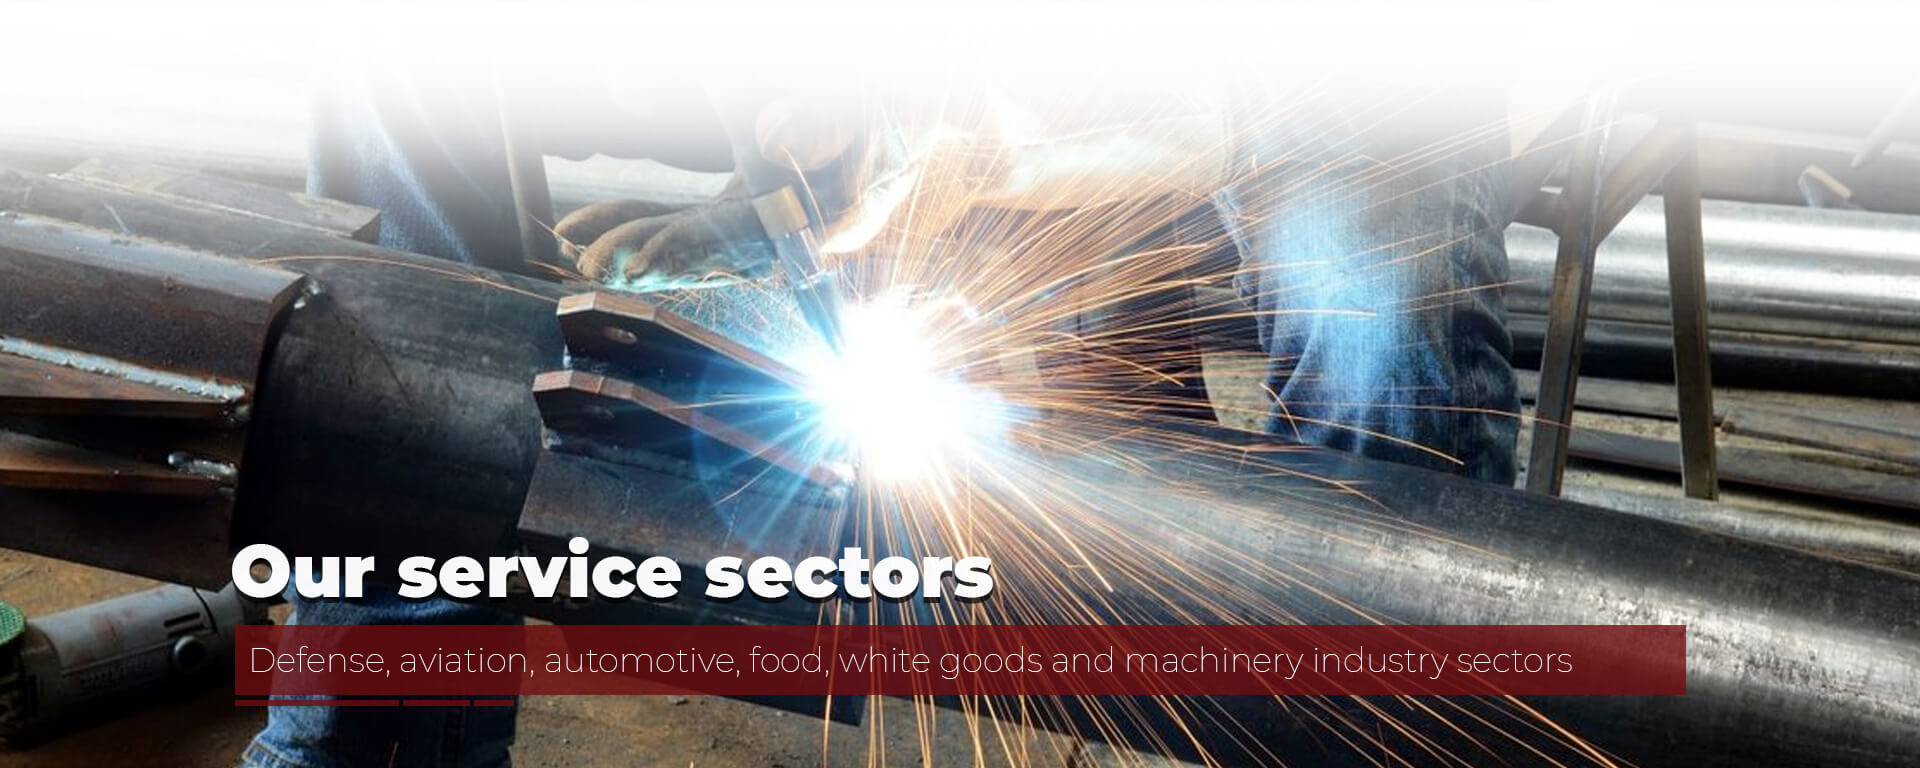 Defense, aviation, automotive, food, white goods and machinery industry sectors